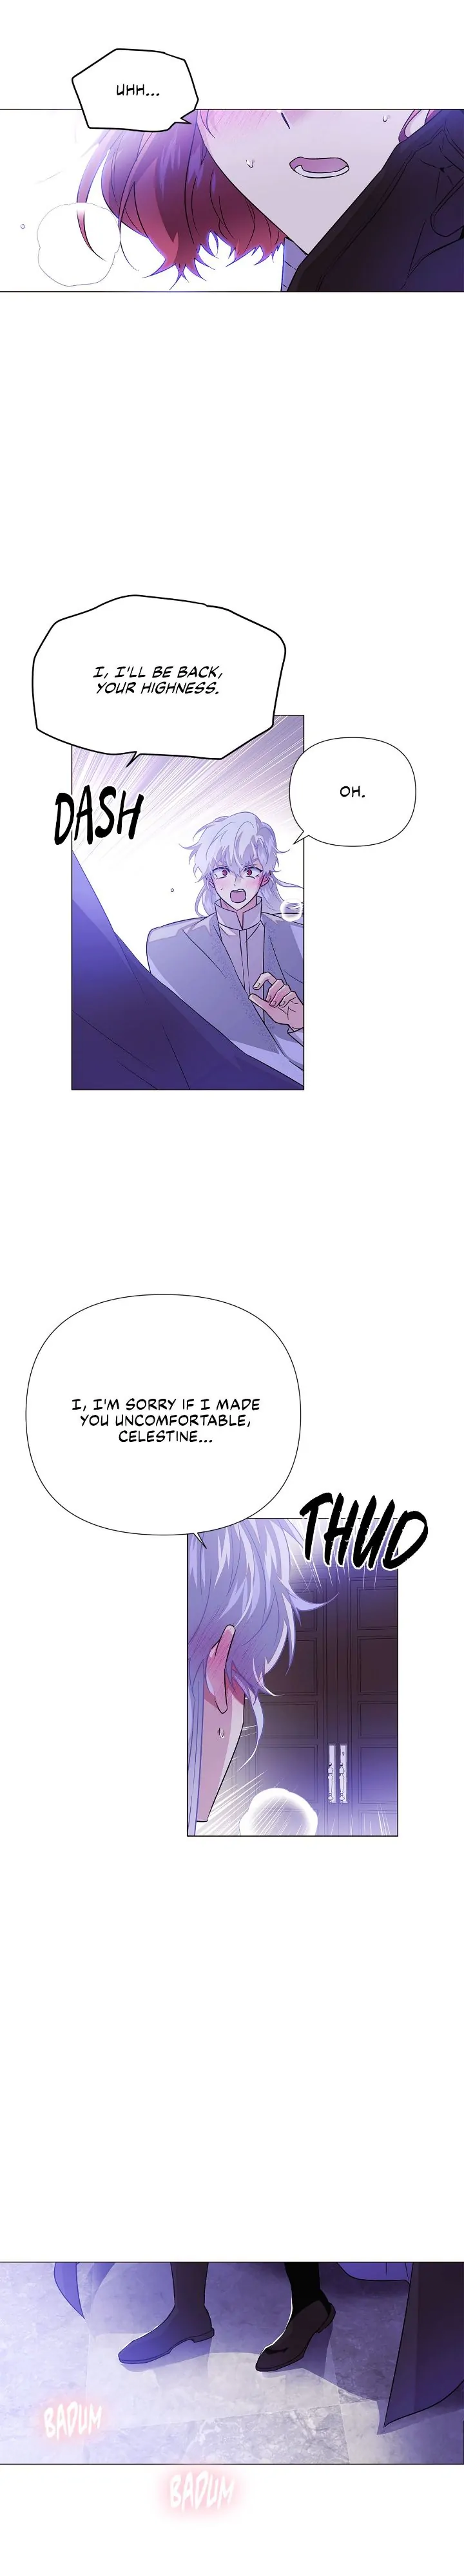 The Villain Discovered My Identity Chapter 122 - Page 7